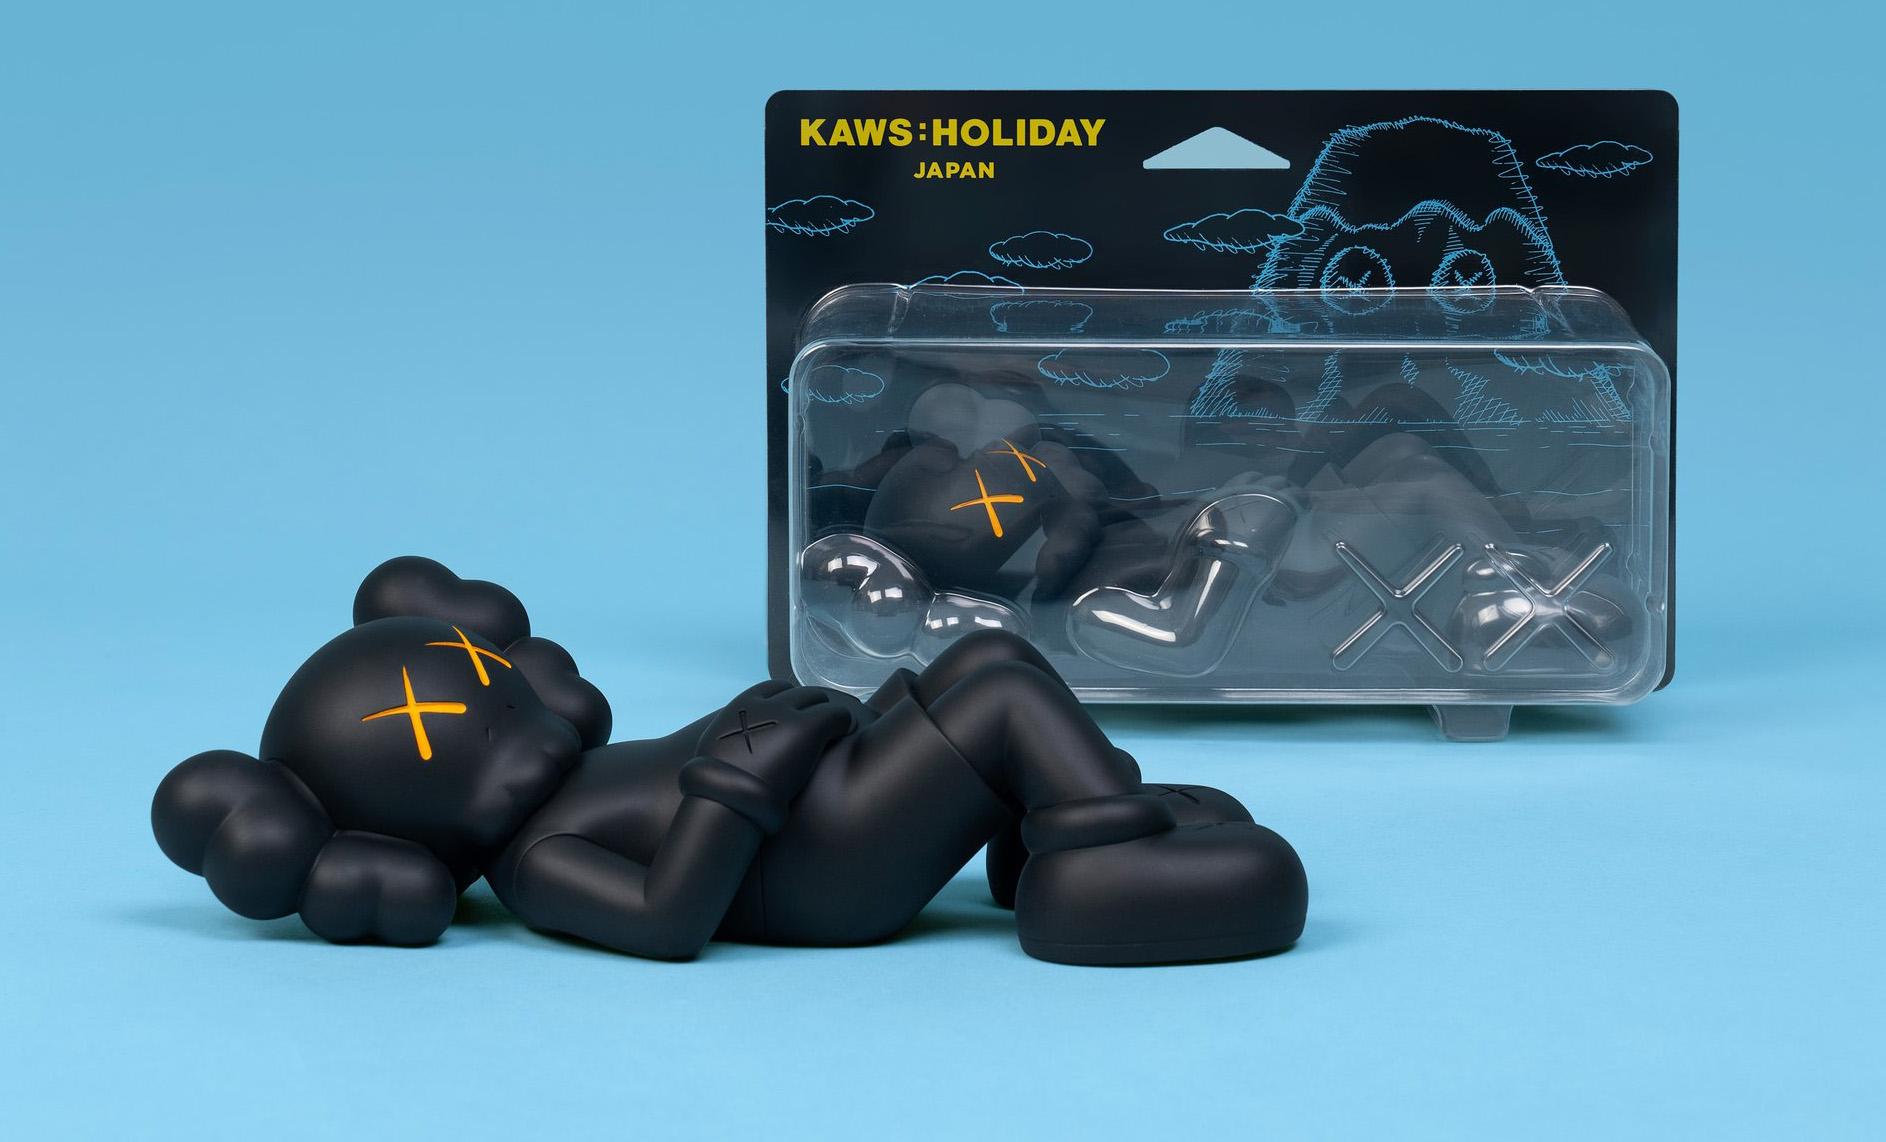 KAWS Black Holiday Companion (KAWS Mount Fuji Japan): 
This figurative vinyl sculpture features KAWS' signature character COMPANION in a resting position. Published by All Rights Reserved to commemorate the debut of KAWS’ 40-meters-long figure